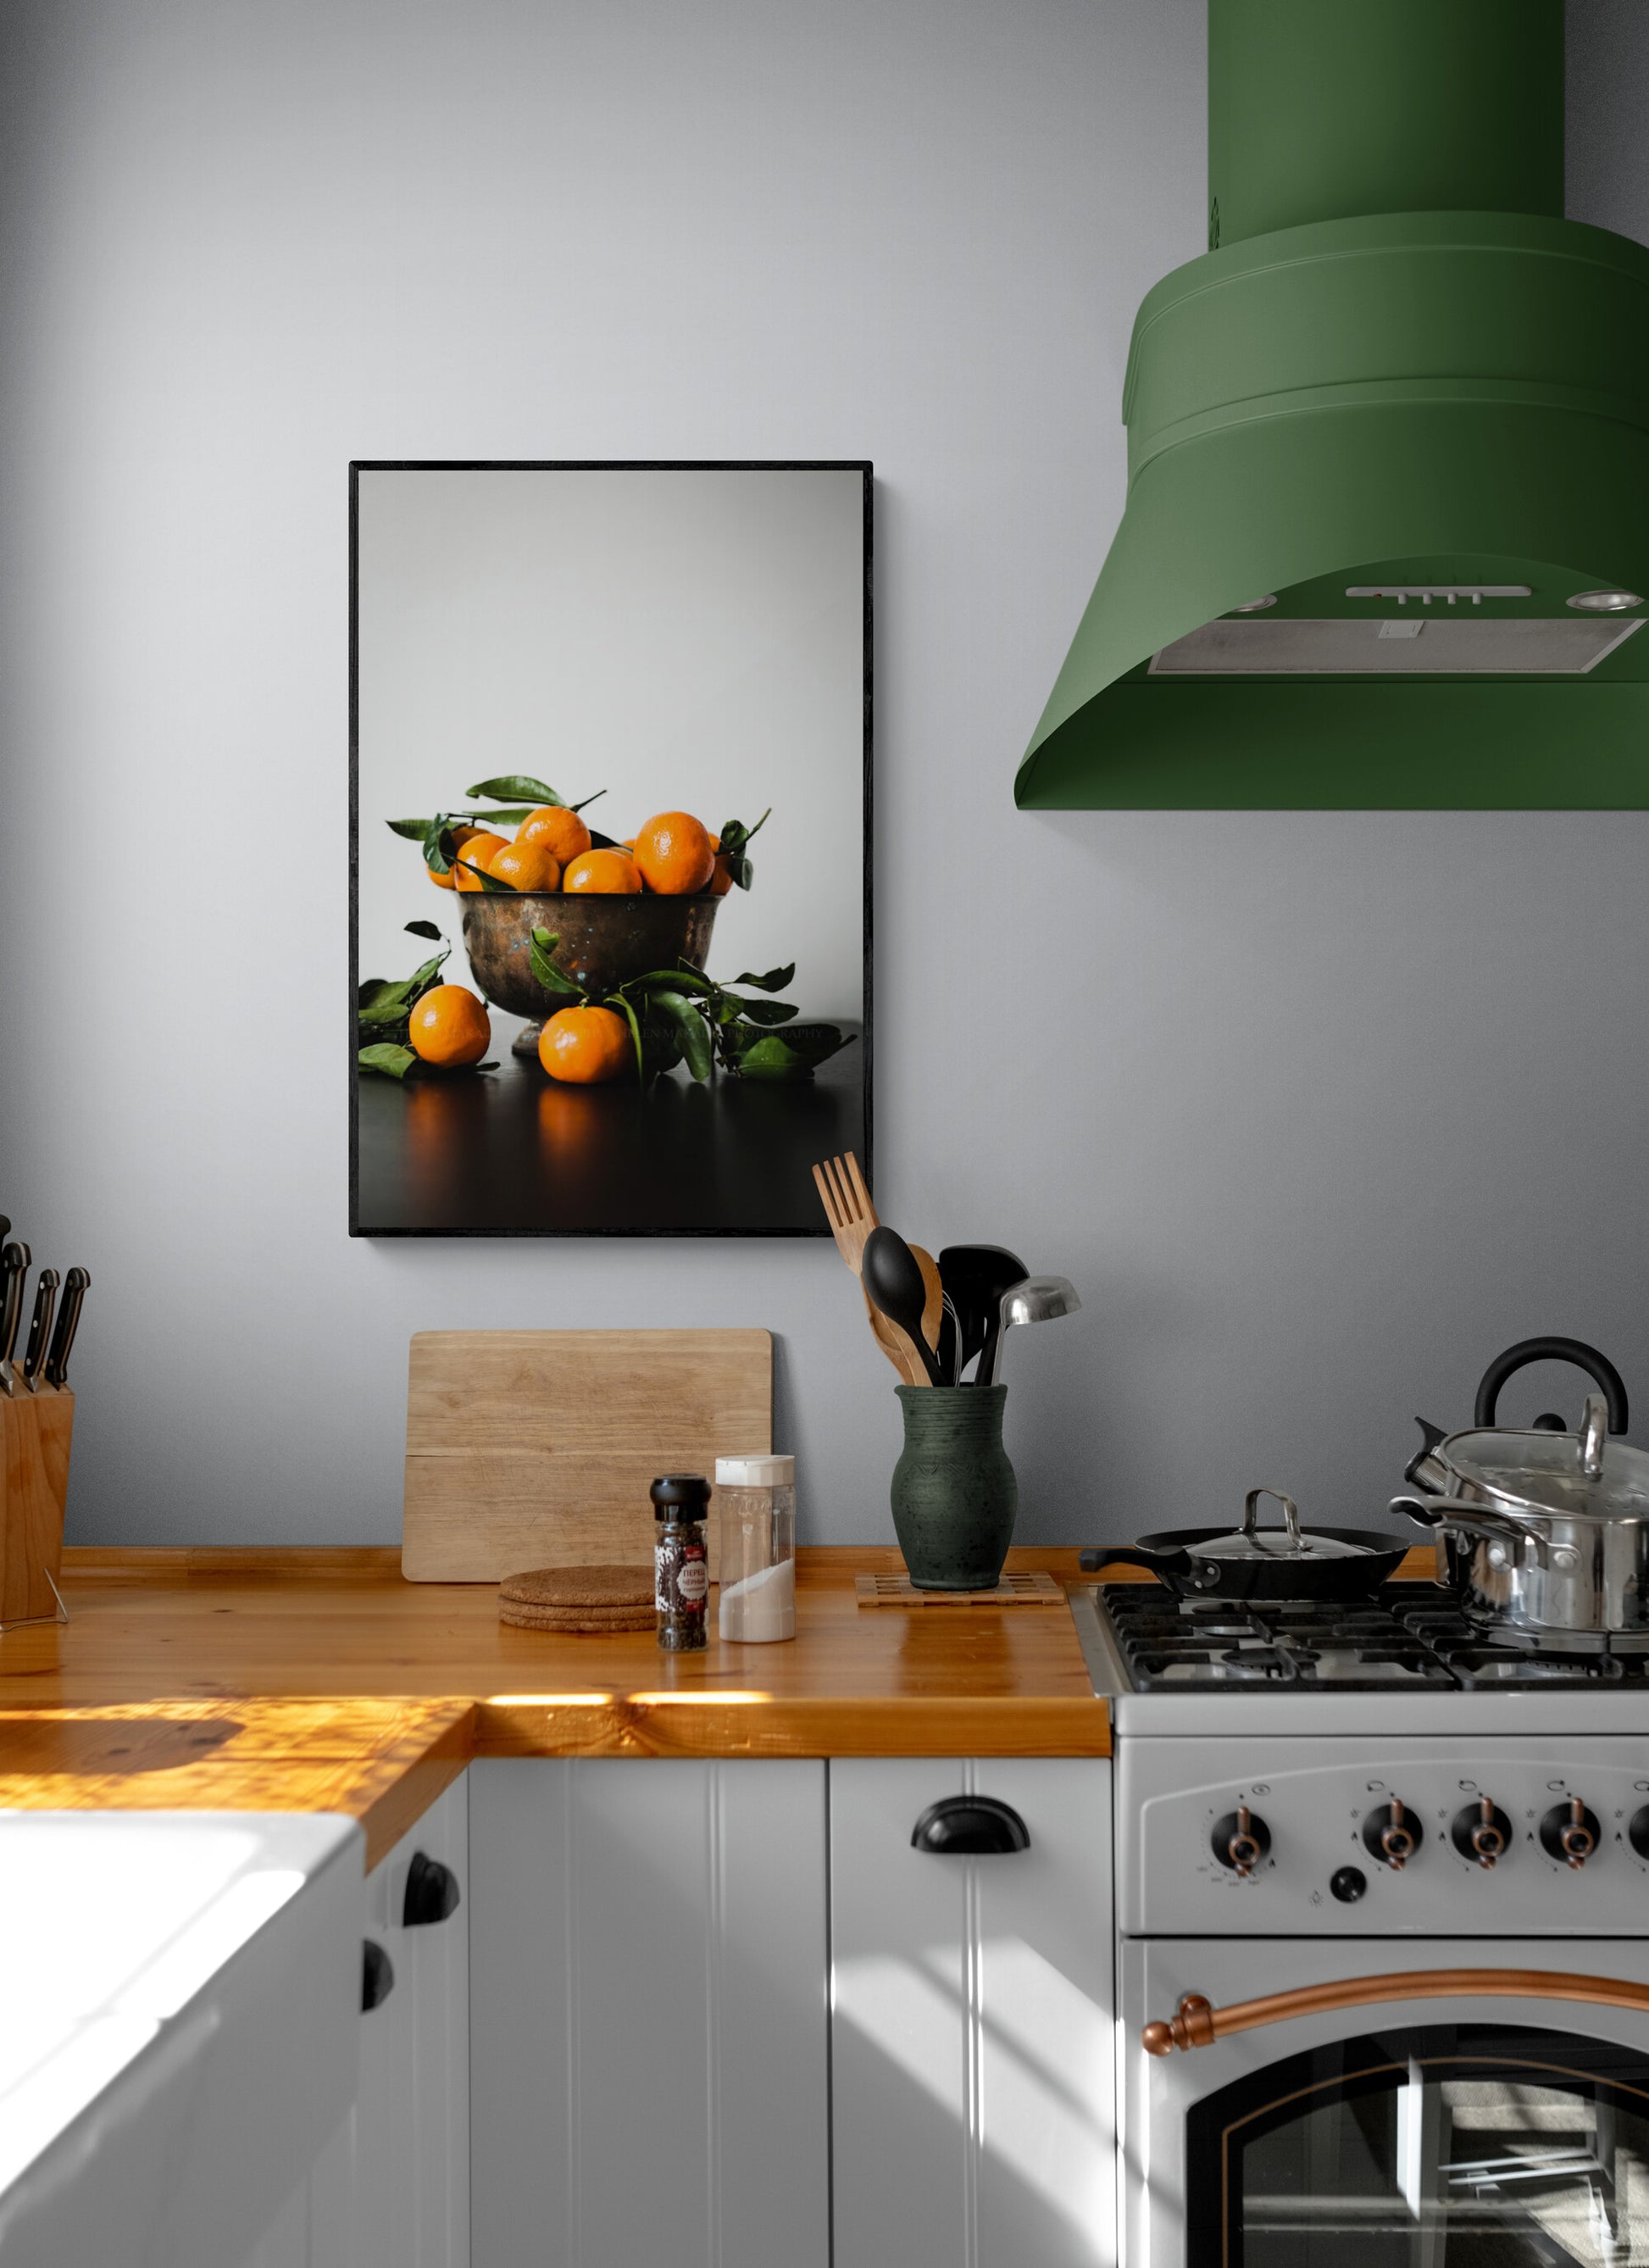 Orange Citrus in a Bowl Photograph as Wall Art in a kitchen